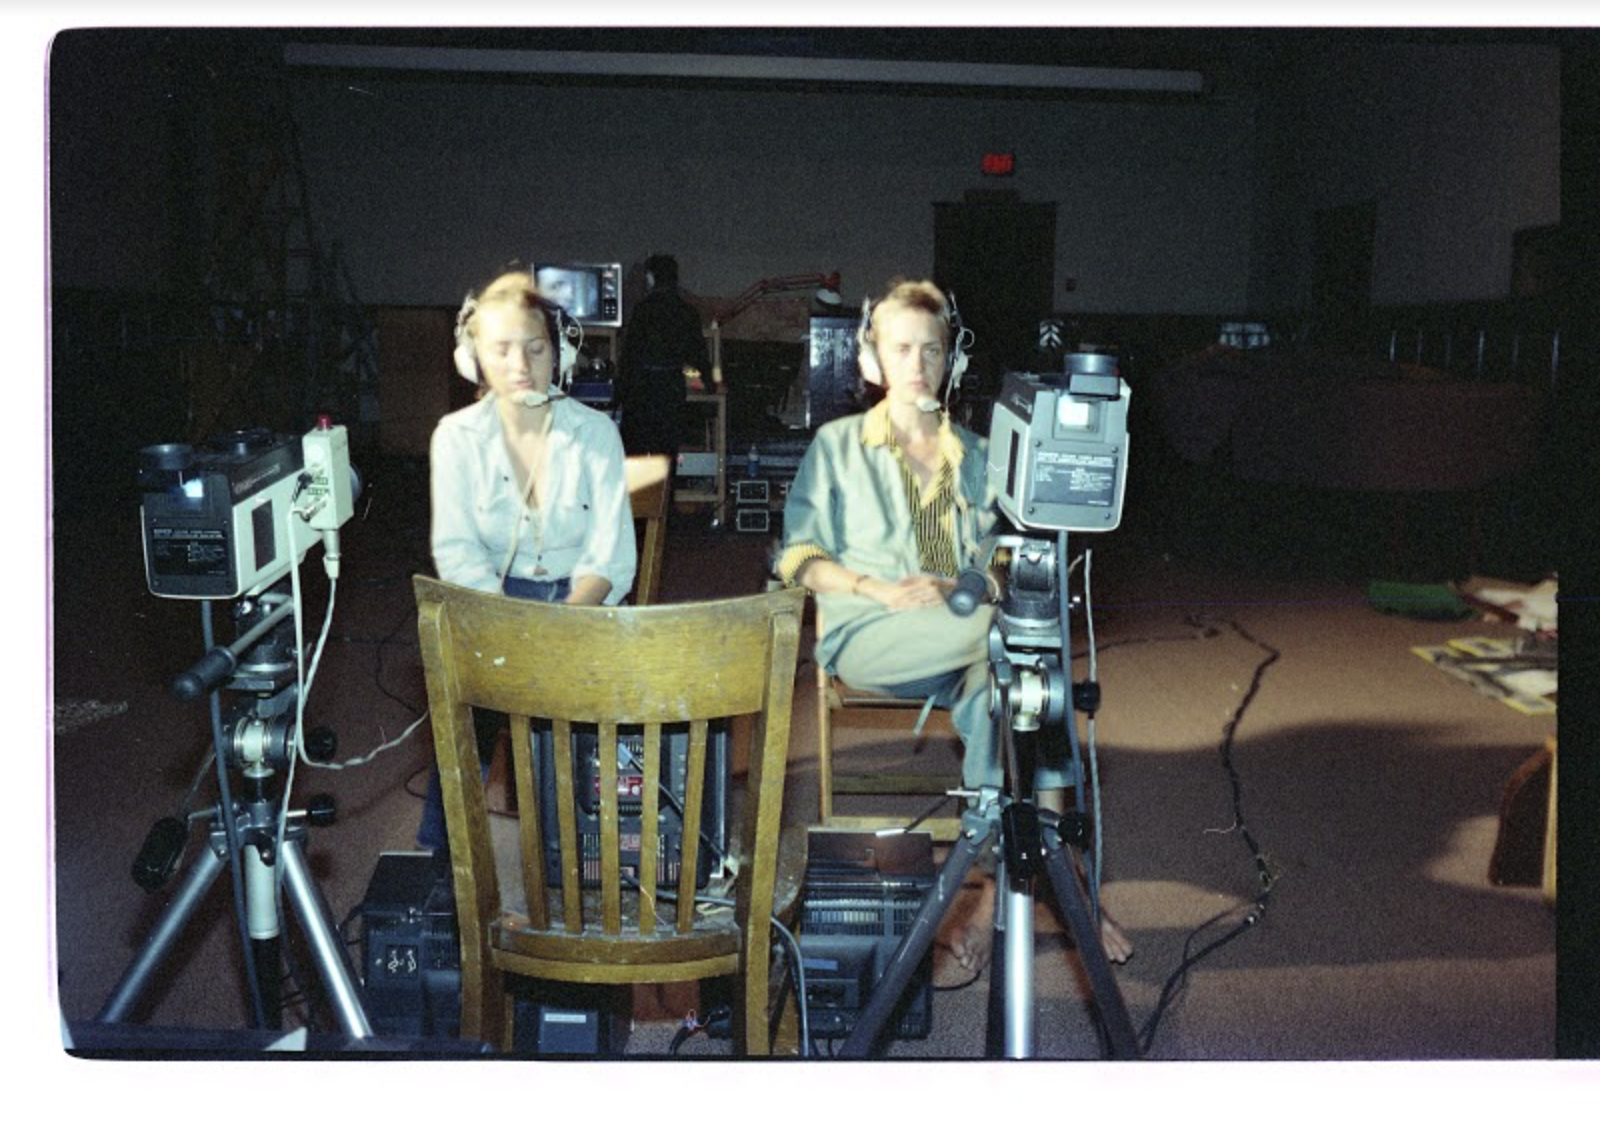 A colour photograph of two women, each seated, wearing headphones, and facing a video camera mounted on a tripod.